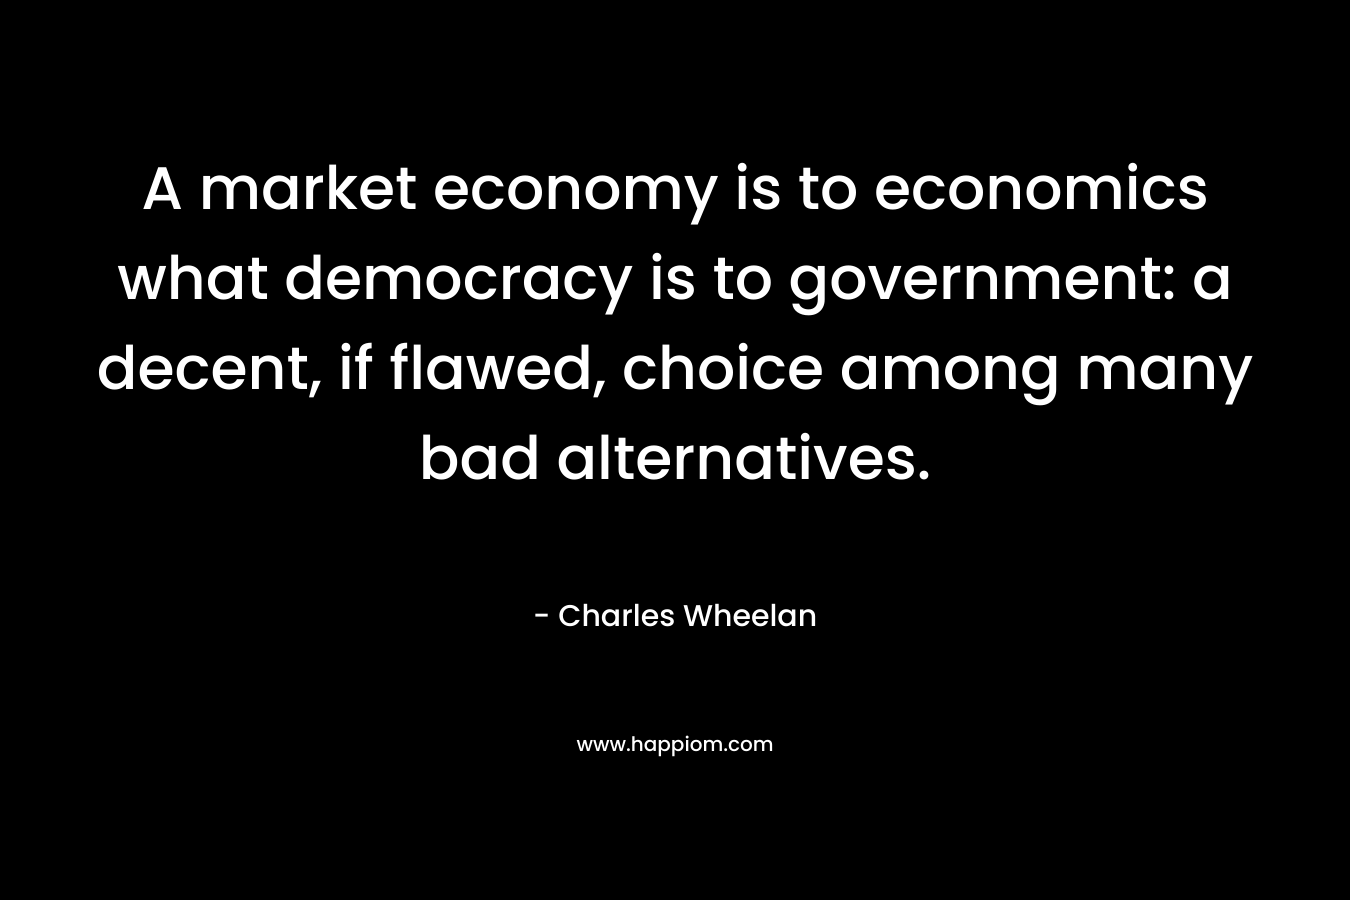 A market economy is to economics what democracy is to government: a decent, if flawed, choice among many bad alternatives. – Charles Wheelan